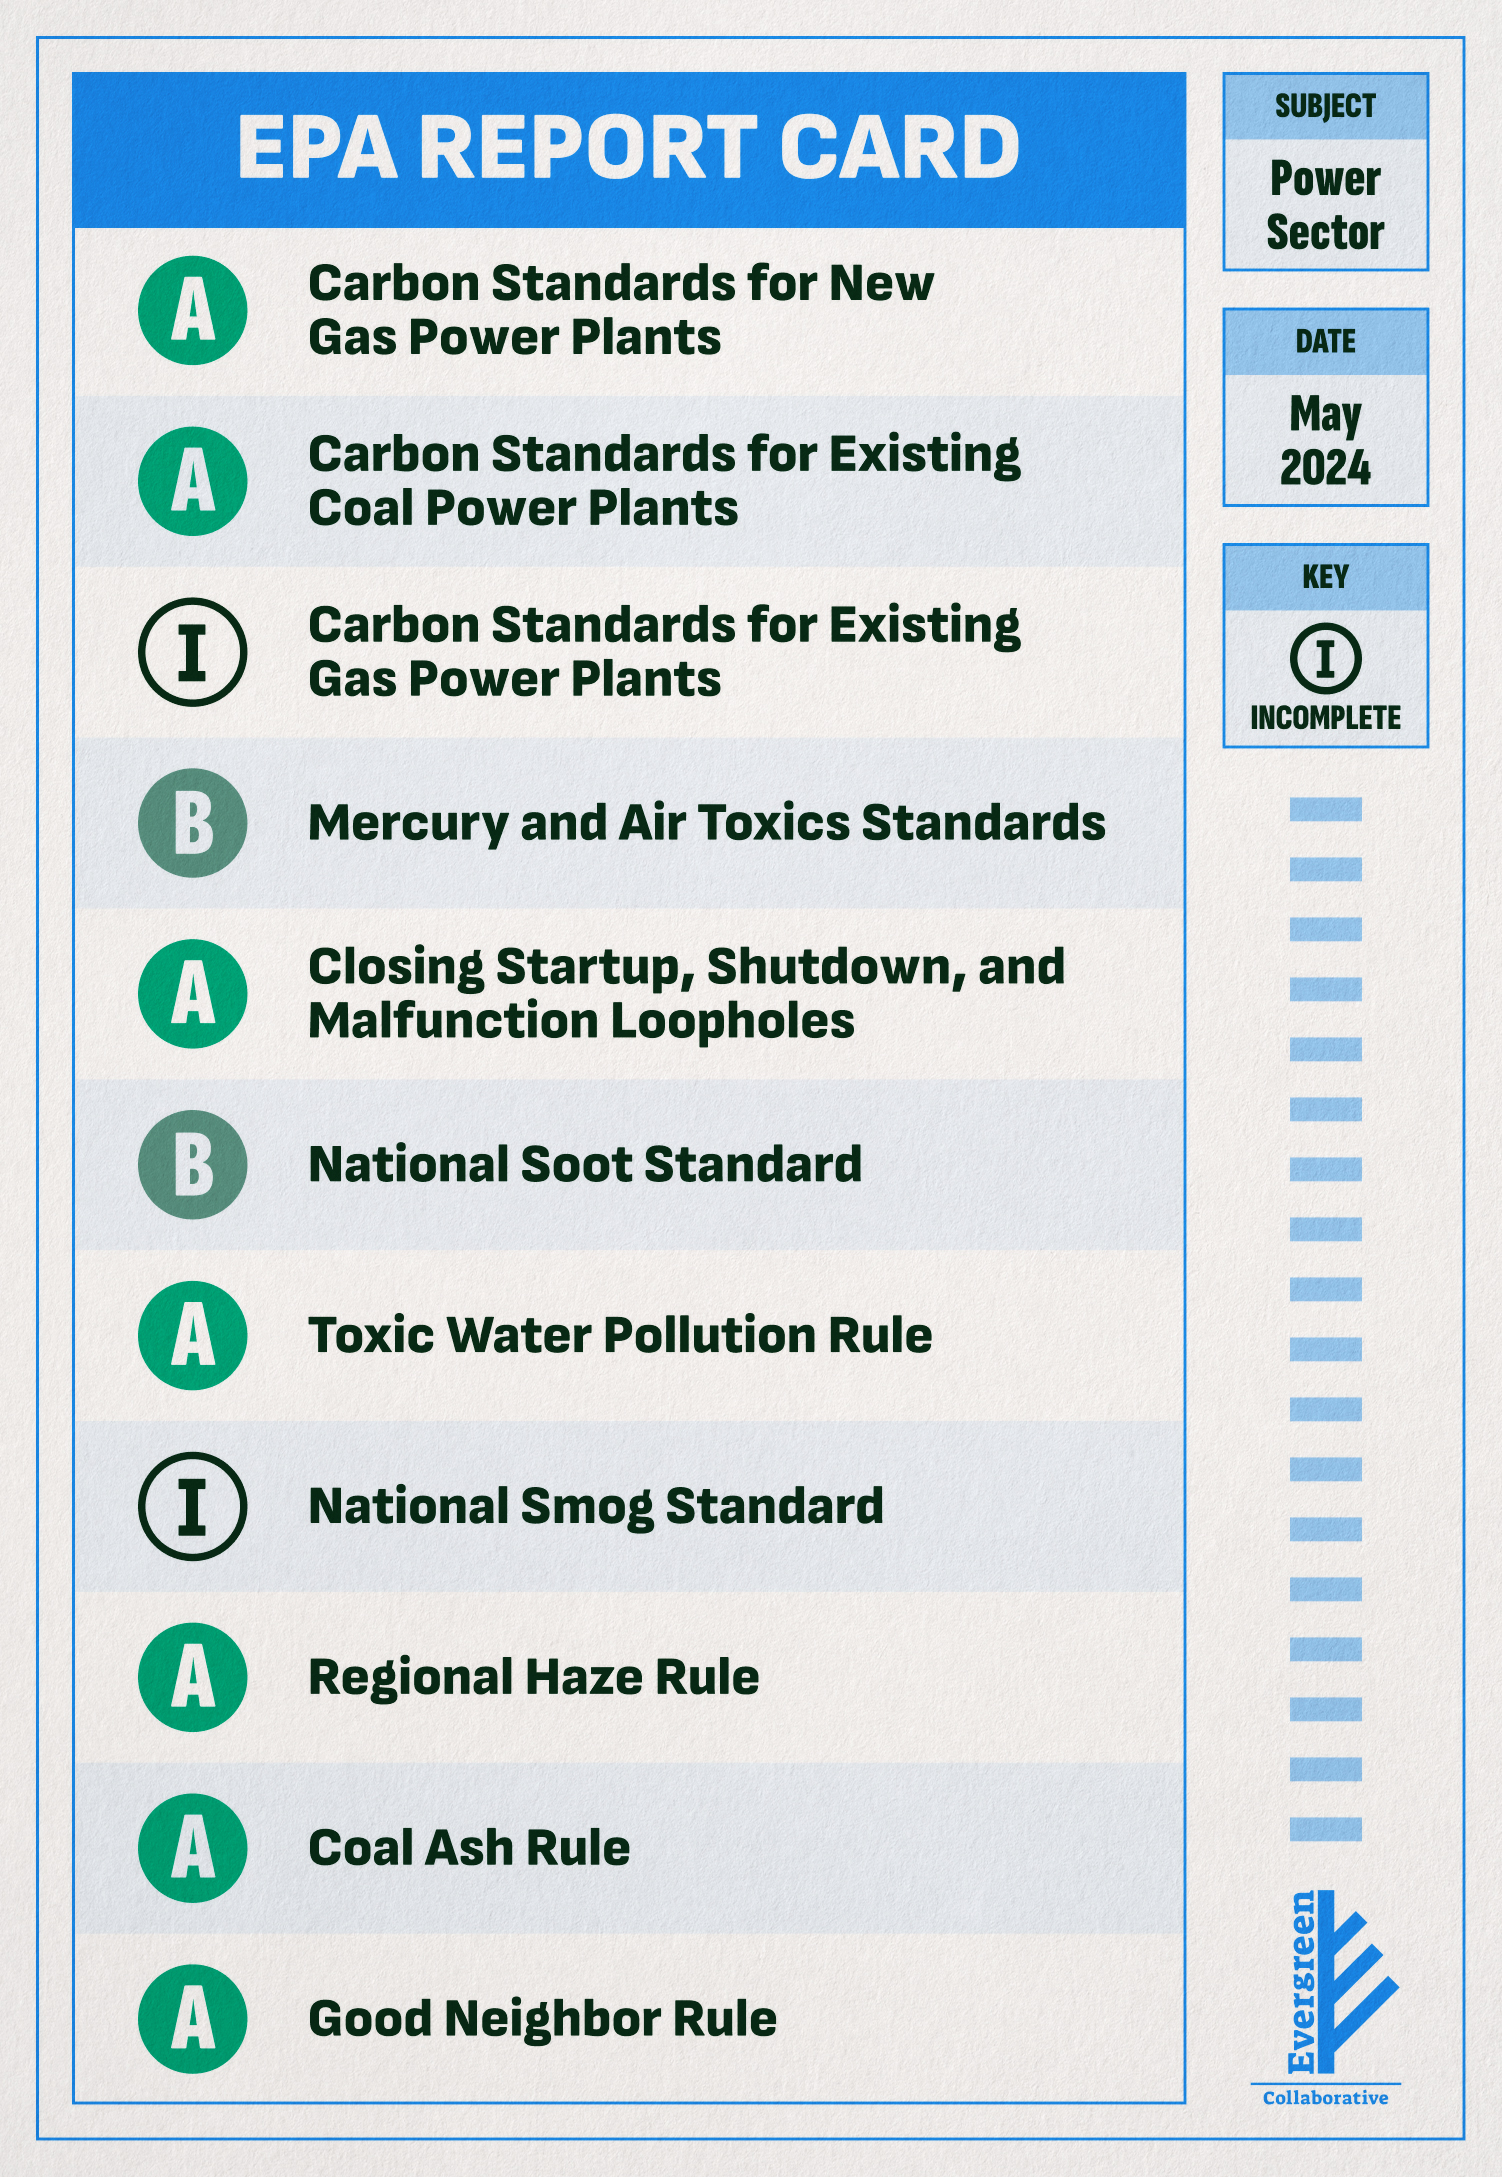 A report card grading EPA's power sector rules as of May 2024. EPA received 7 A's, 2 B's, and 2 Incompletes.